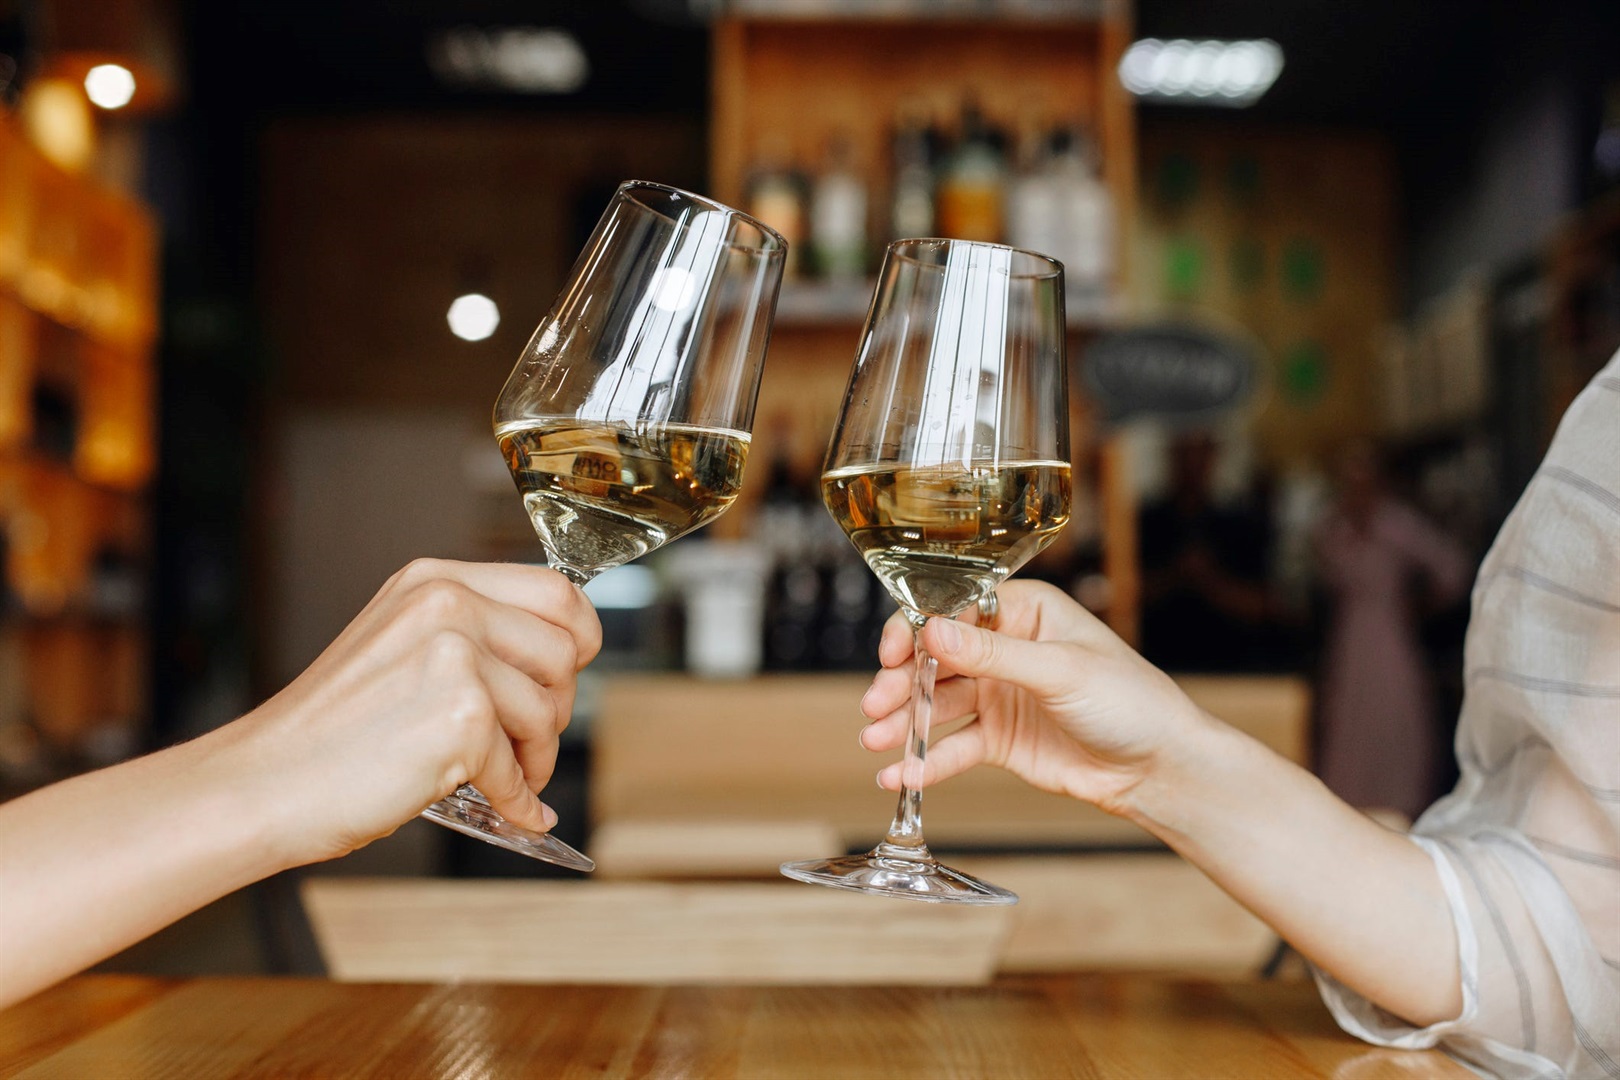 Some well-known white wines include Riesling, Sauvignon Blanc, and Albariño. Mykhailo Lukashuk/Getty Images